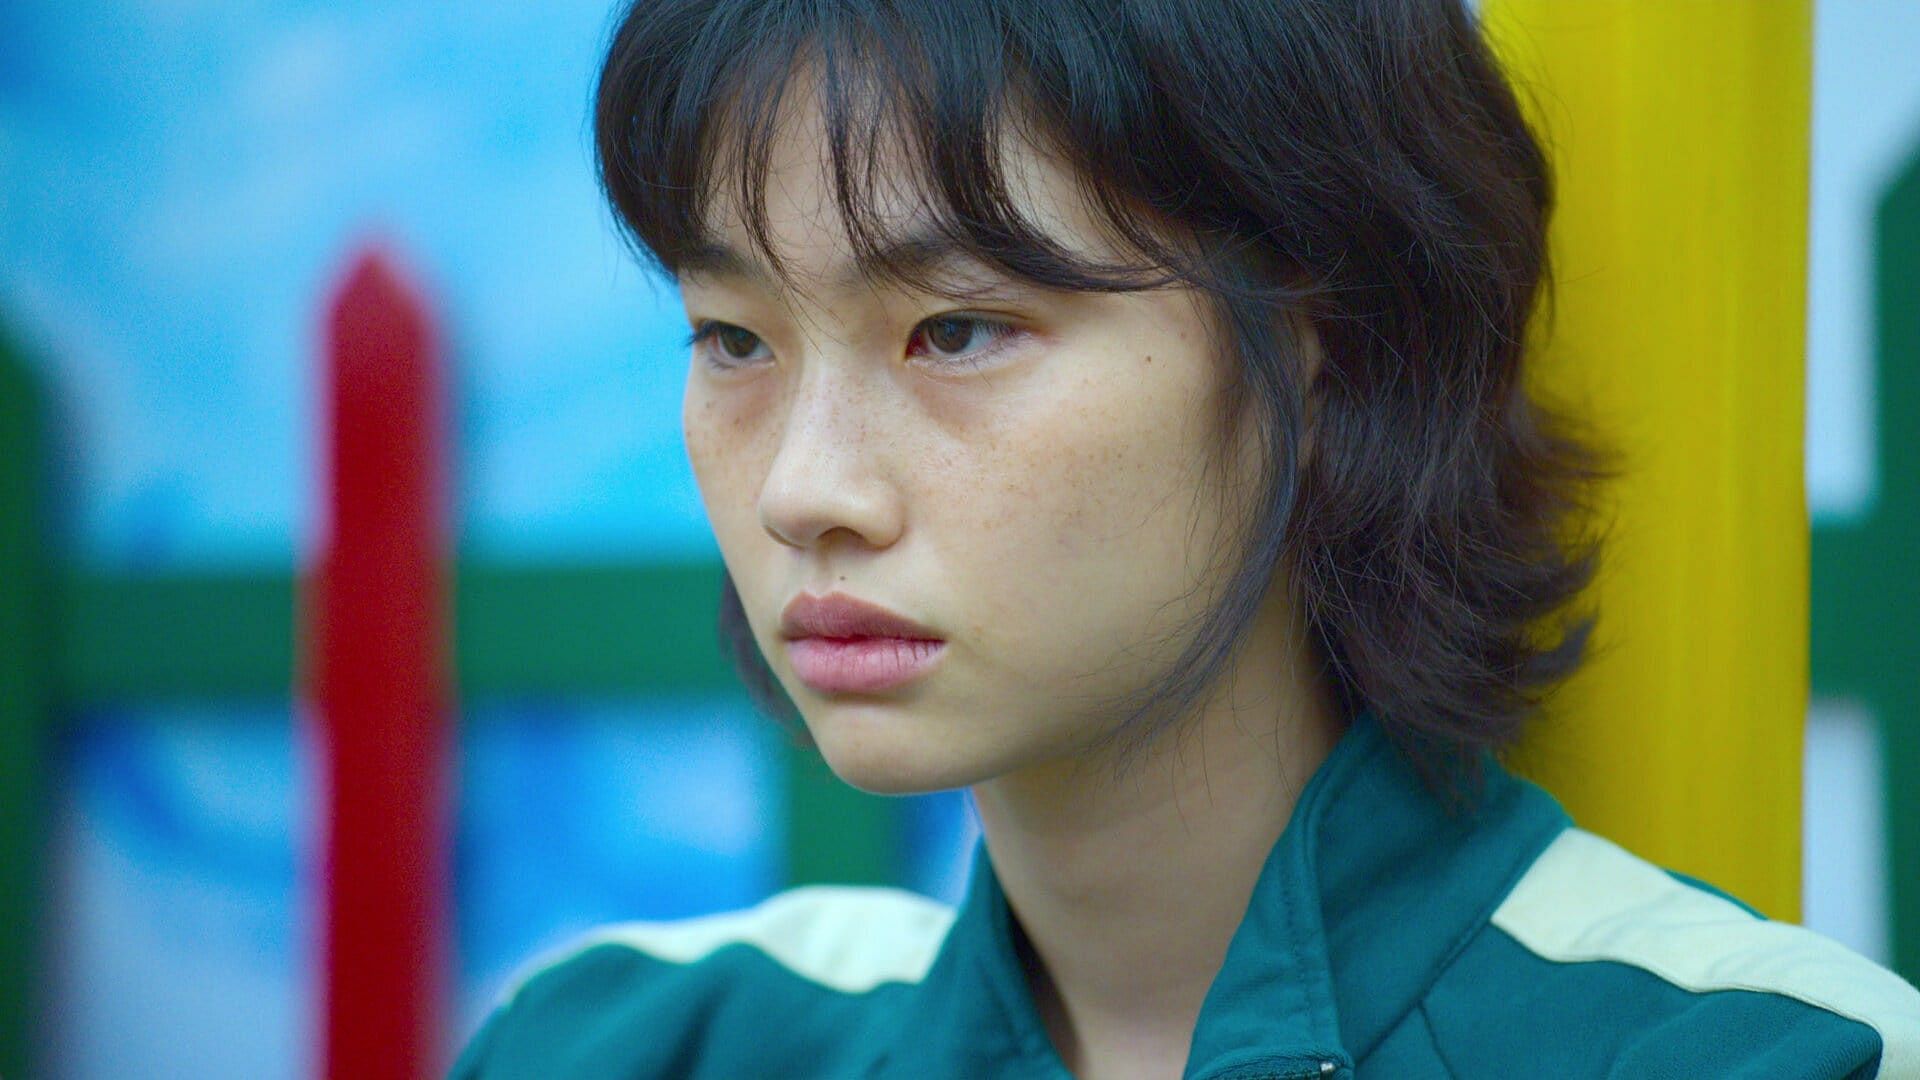 How Jung Ho-Yeon May Return to Squid Game for Season 2